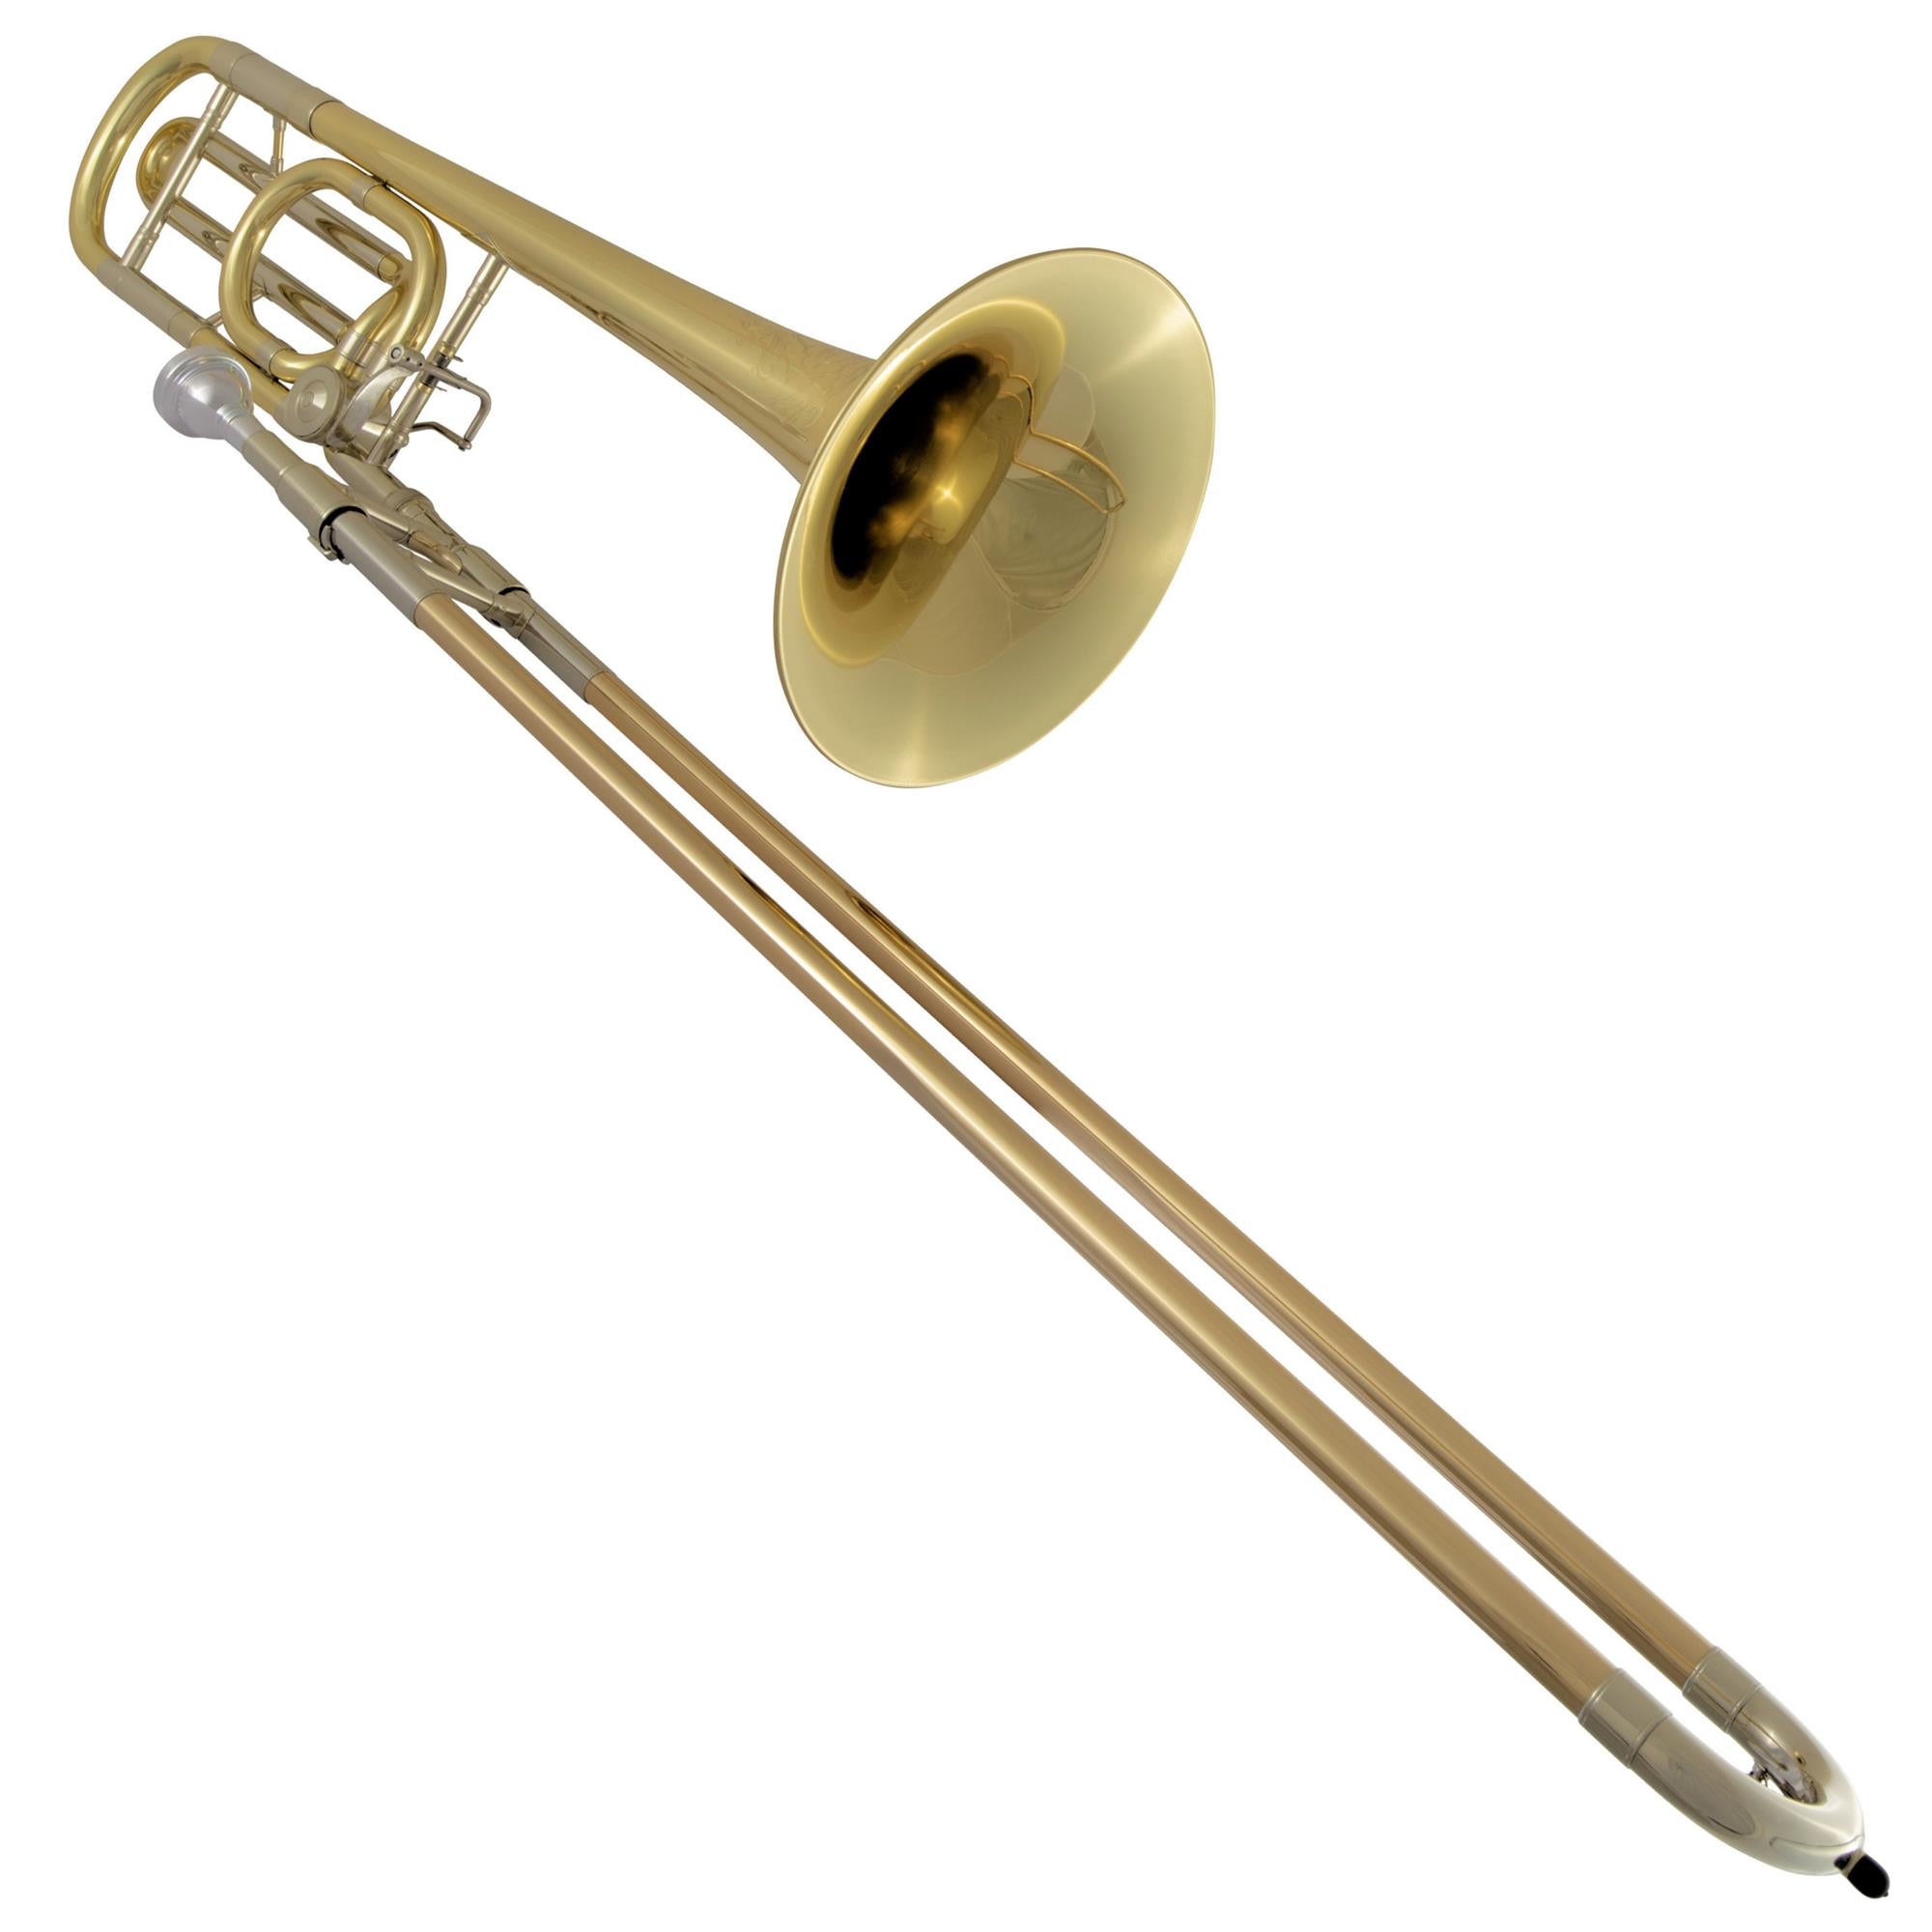 Conn 88HY-O Large Bore Bb/F Trombone..Yellow Brass, Clear Lacquer outfit